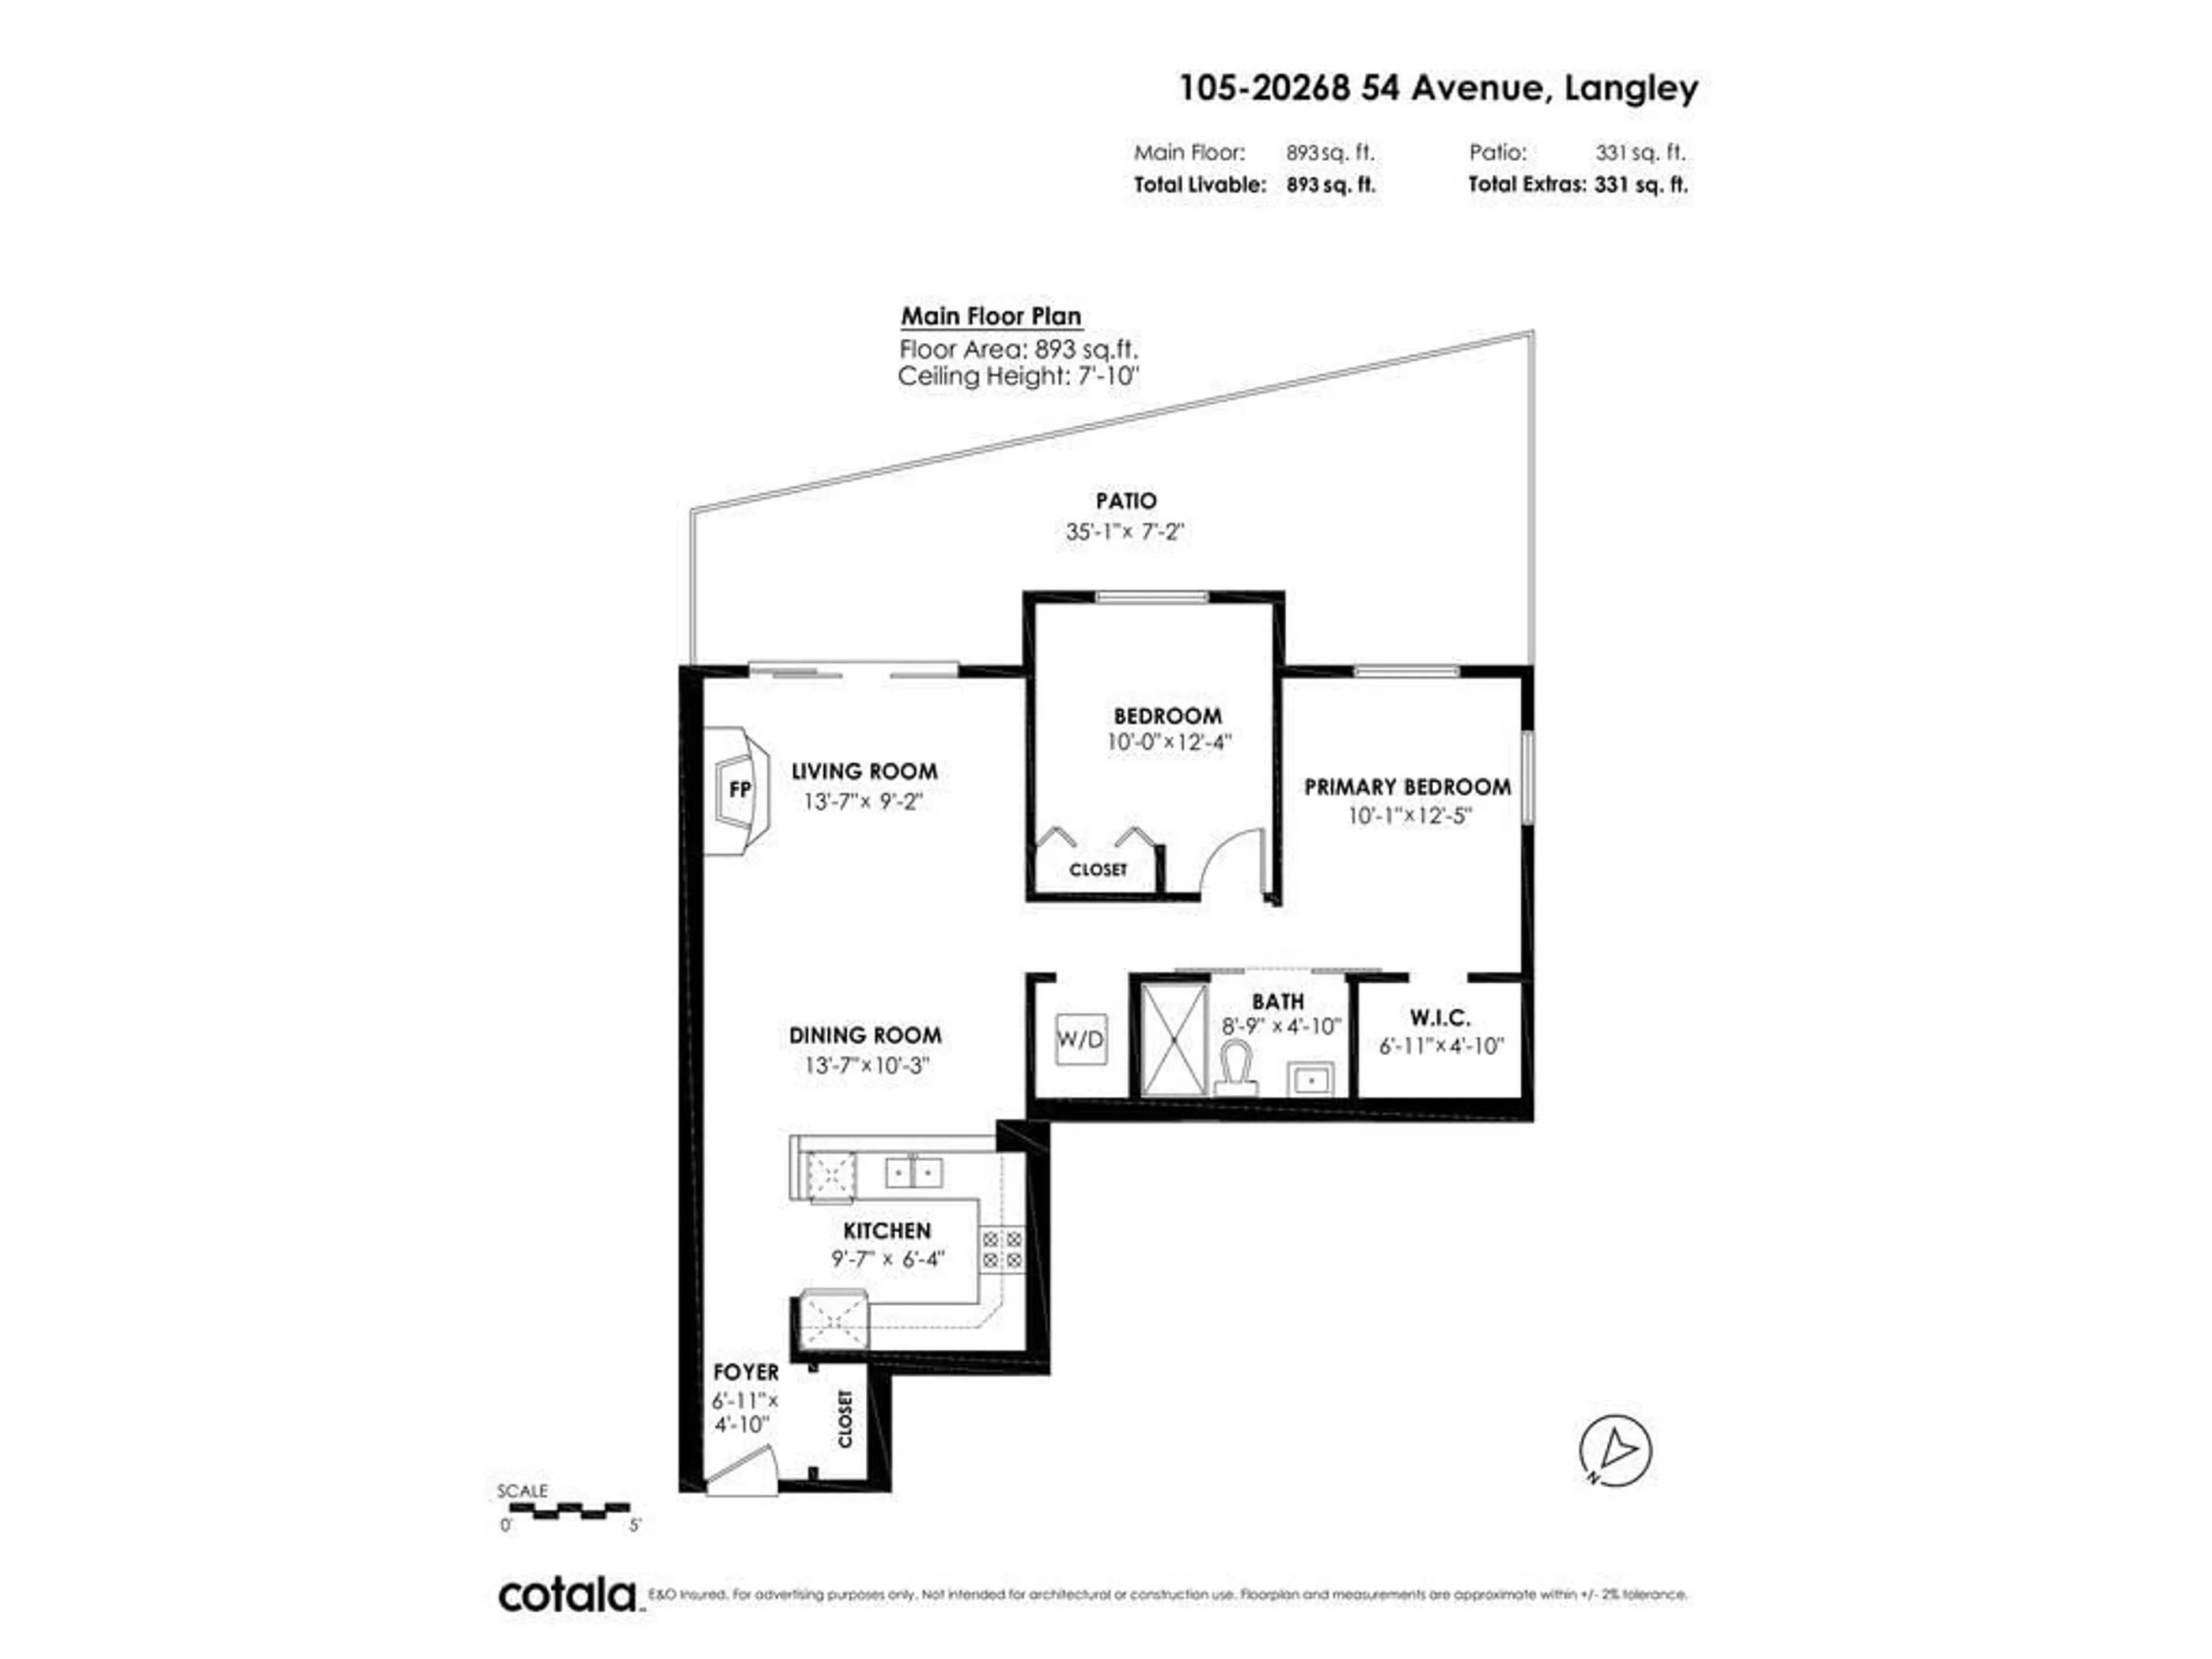 Floor plan for 105 20268 54 AVENUE, Langley British Columbia V3A8R9